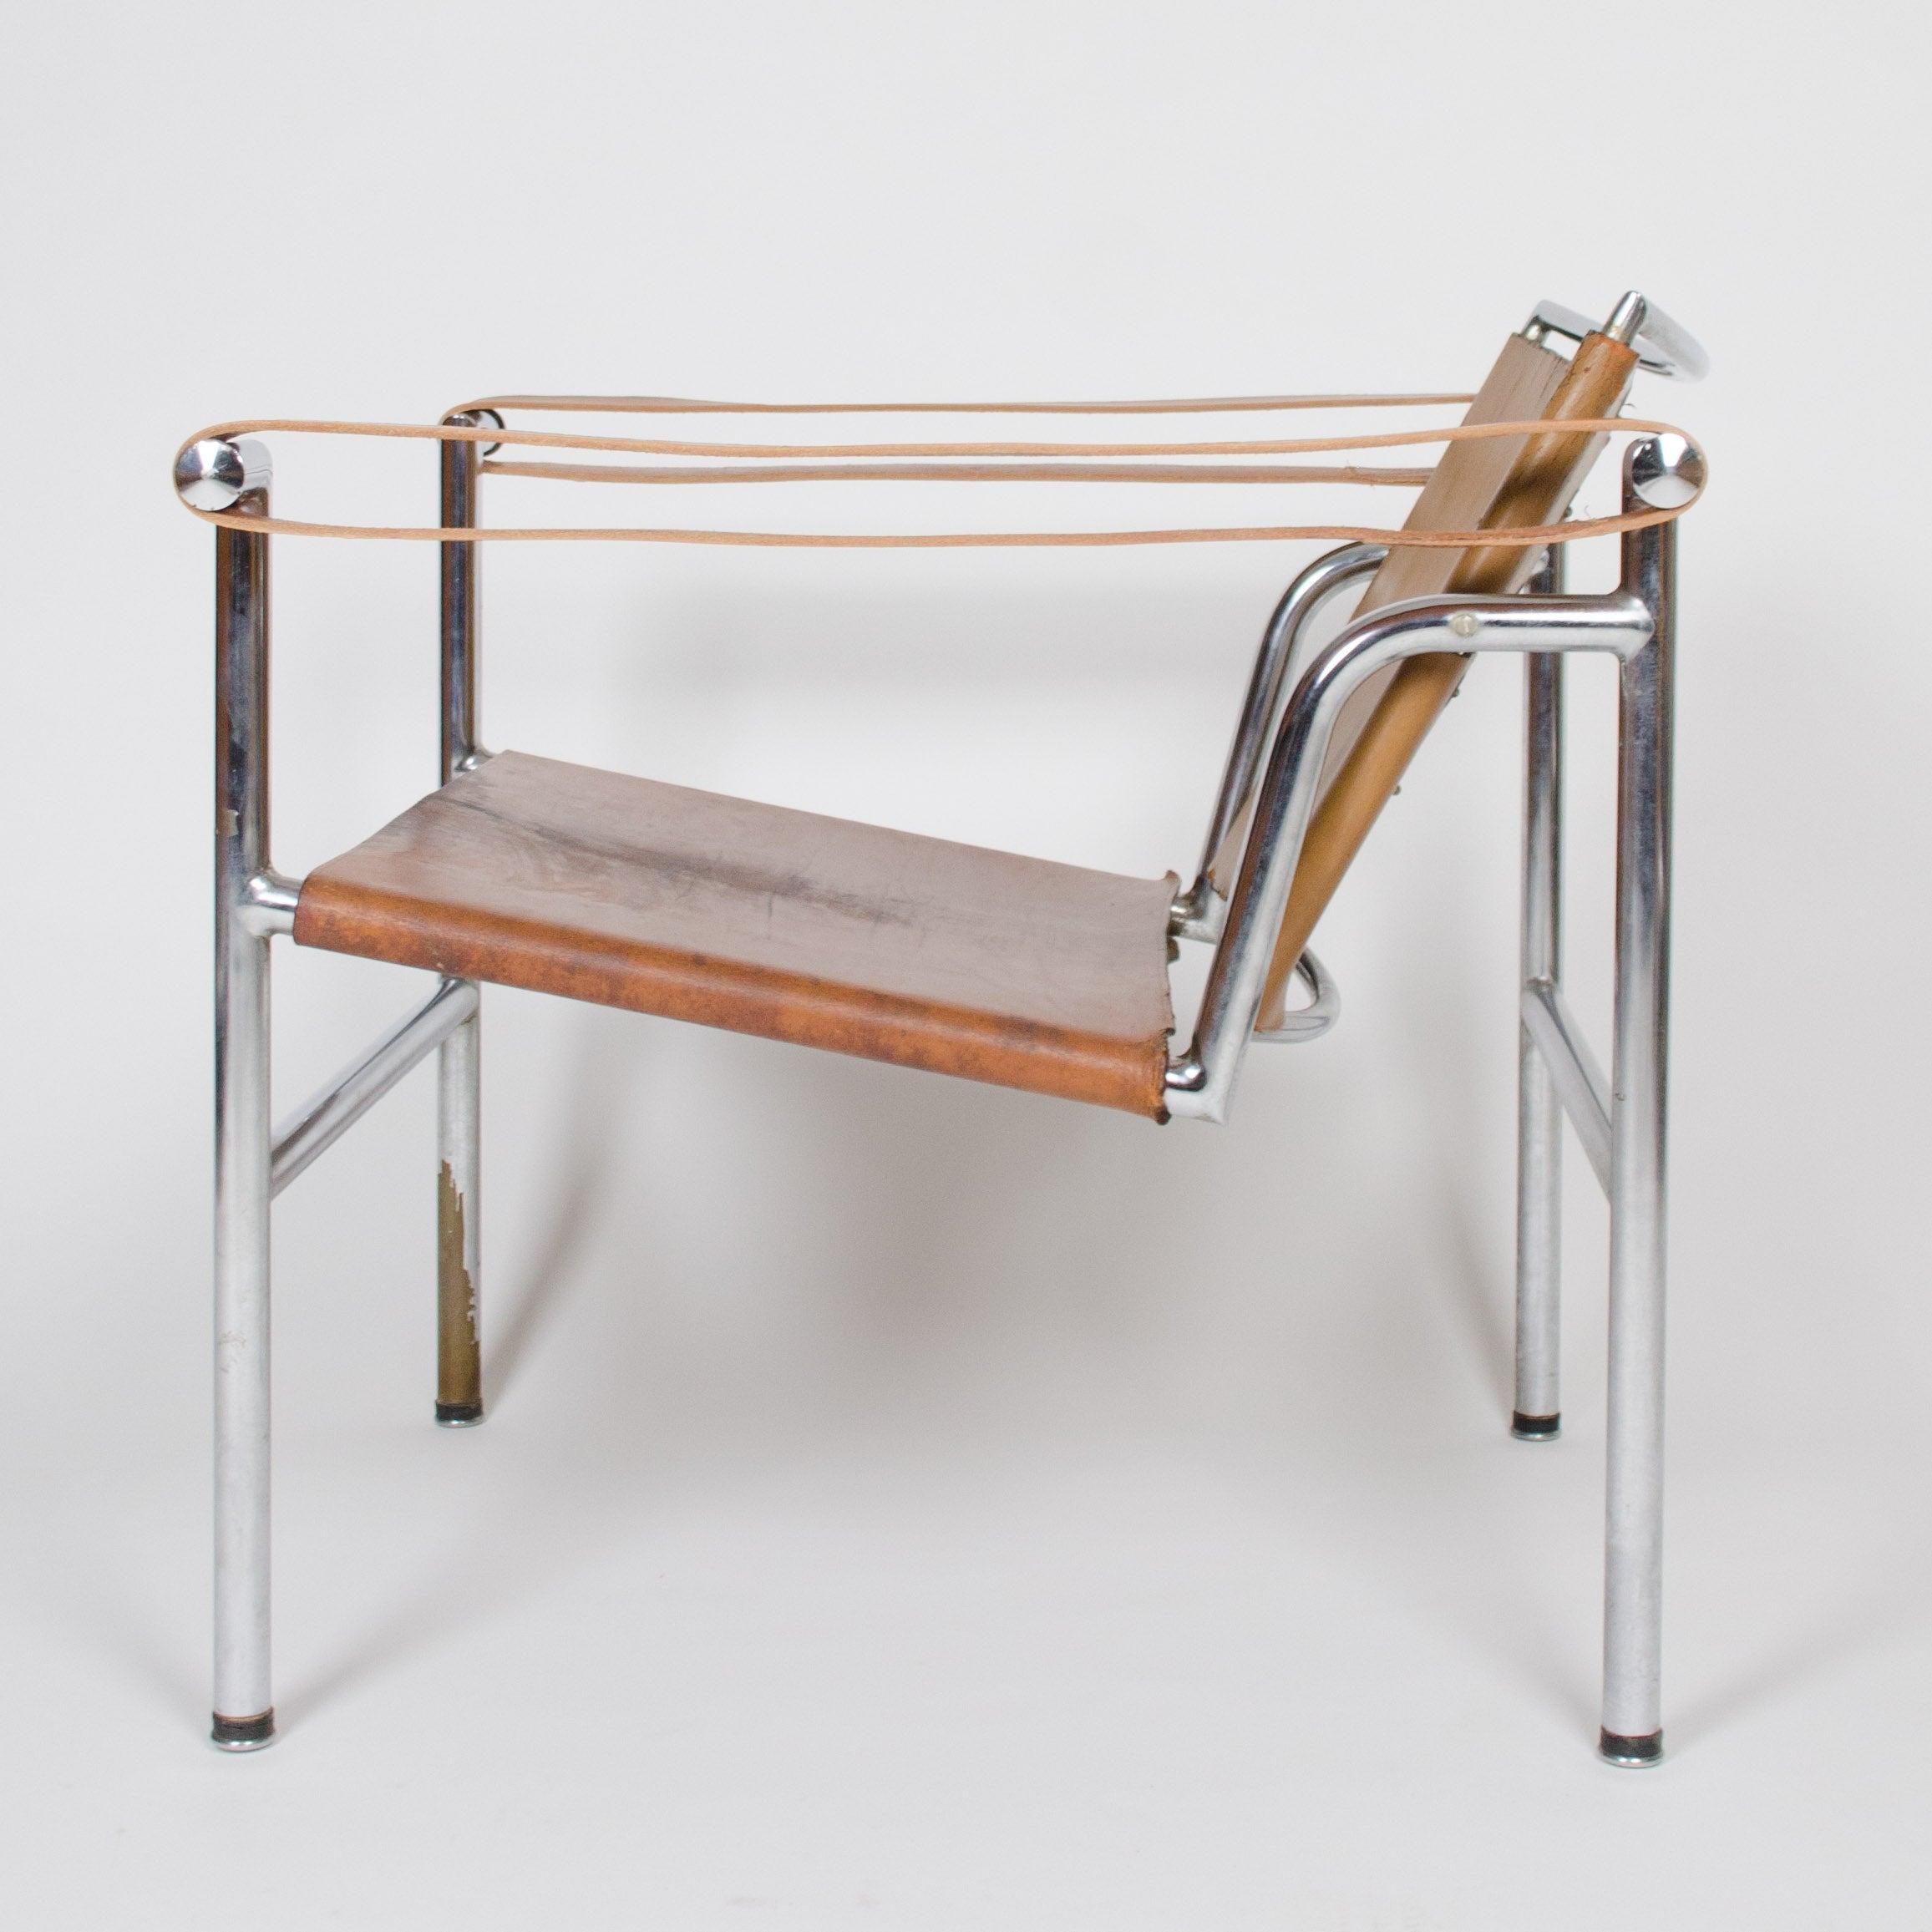 Listed for sale is a pair of very special and original vintage LC1 Basculant Sling chairs. They were designed most notably by Le Corbusier, along with Pierre Jeanneret and Charlotte Perriand.

What makes this pair particularly special, is that both